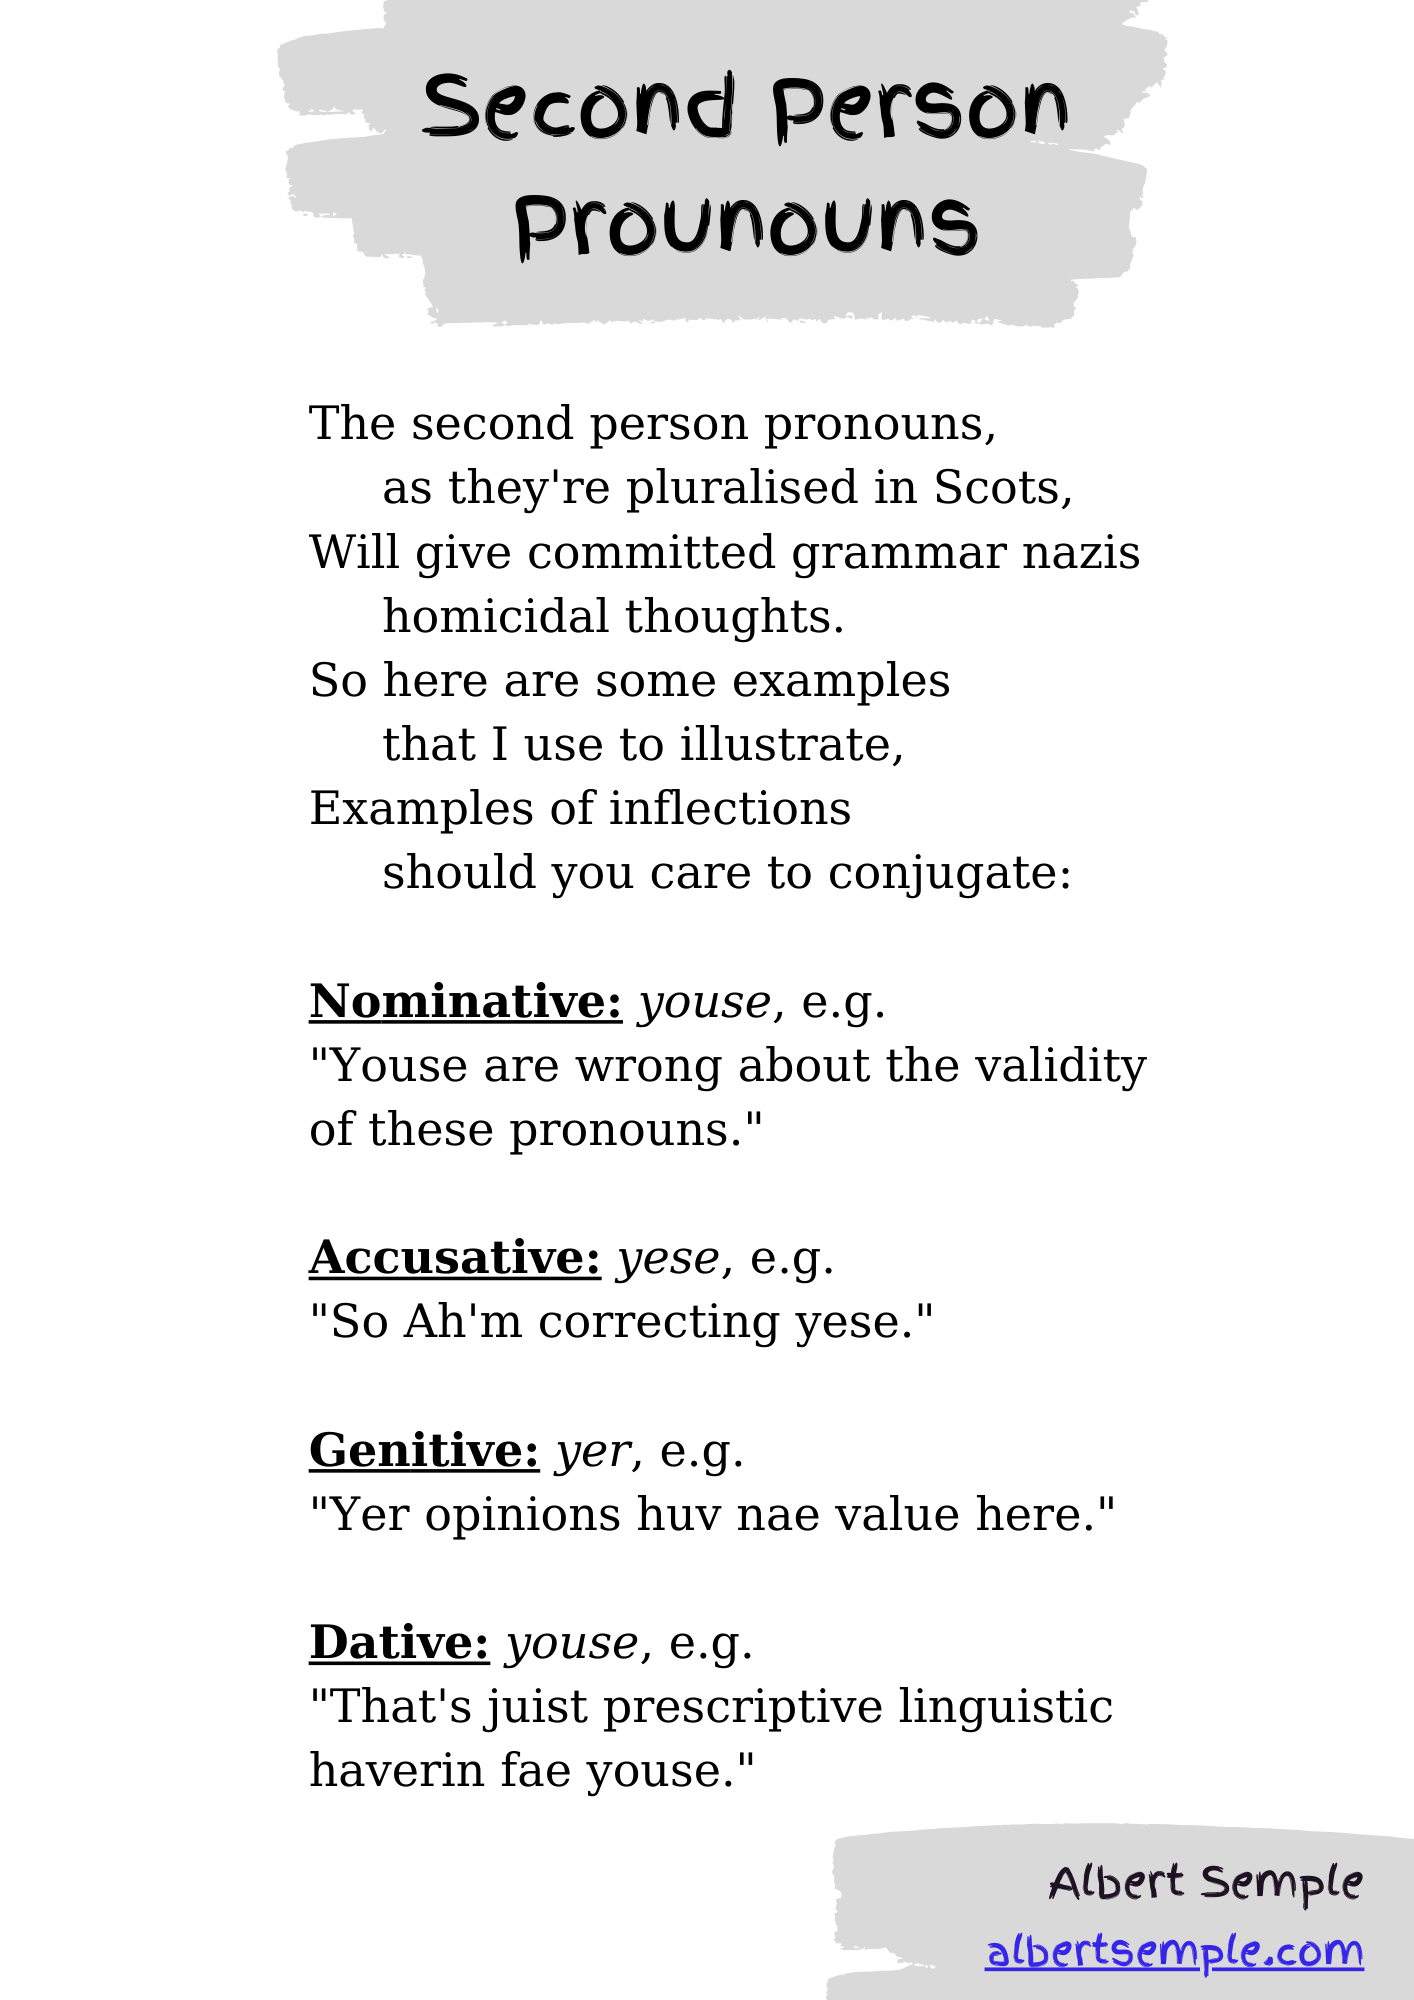 The second person pronouns,
 as they're pluralised in Scots,
Will give committed grammar nazis
 homicidal thoughts.
So here are some examples
 that I use to illustrate,
Examples of inflections
 should you care to conjugate:
Nominative: youse, e.g.
 ＂Youse are wrong about the validity of these pronouns.＂
Accusative: yese, e.g.
 ＂So Ah'm correcting yese.＂
Genitive: yer, e.g.
 ＂Yer opinions huv nae value here.＂
Dative: youse, e.g.
 ＂That's juist prescriptive linguistic haverin fae youse.＂